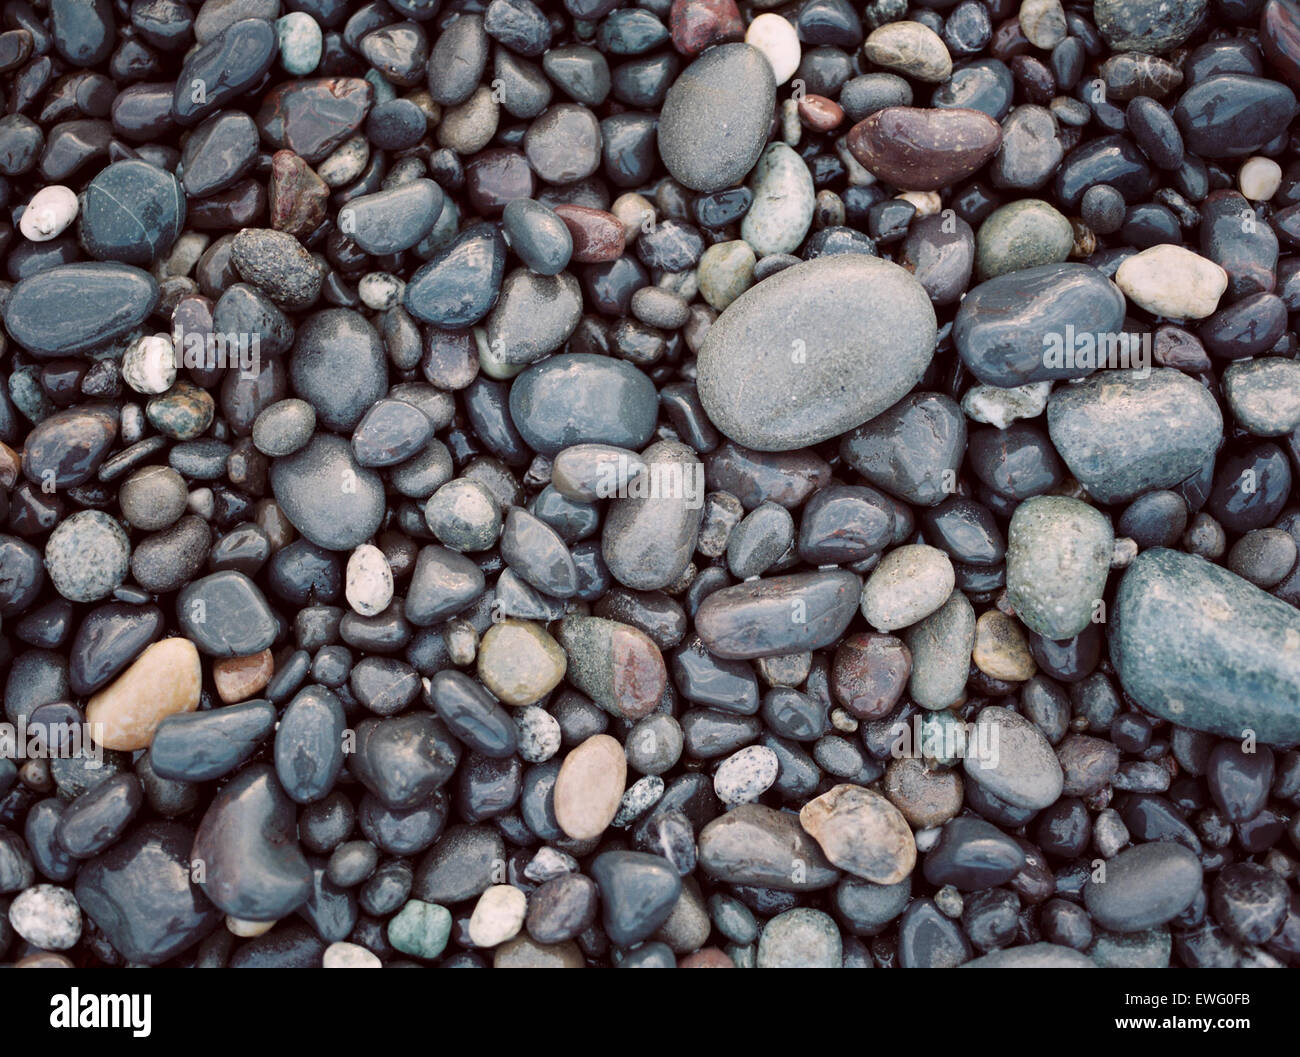 Group of Glossy Pebbles Stock Photo